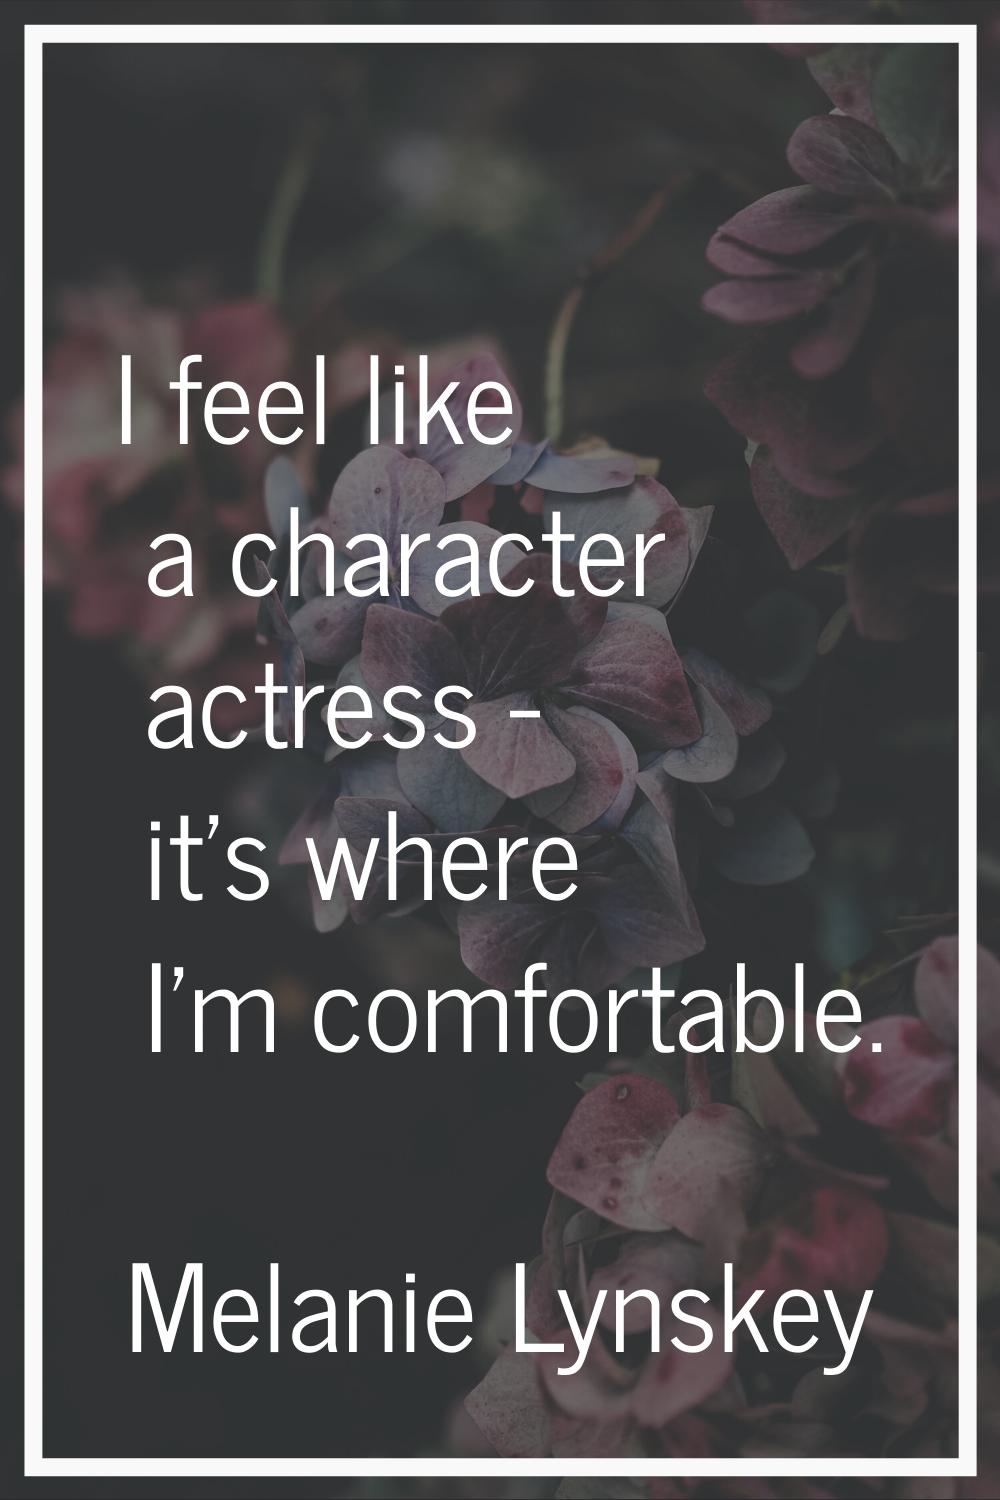 I feel like a character actress - it's where I'm comfortable.